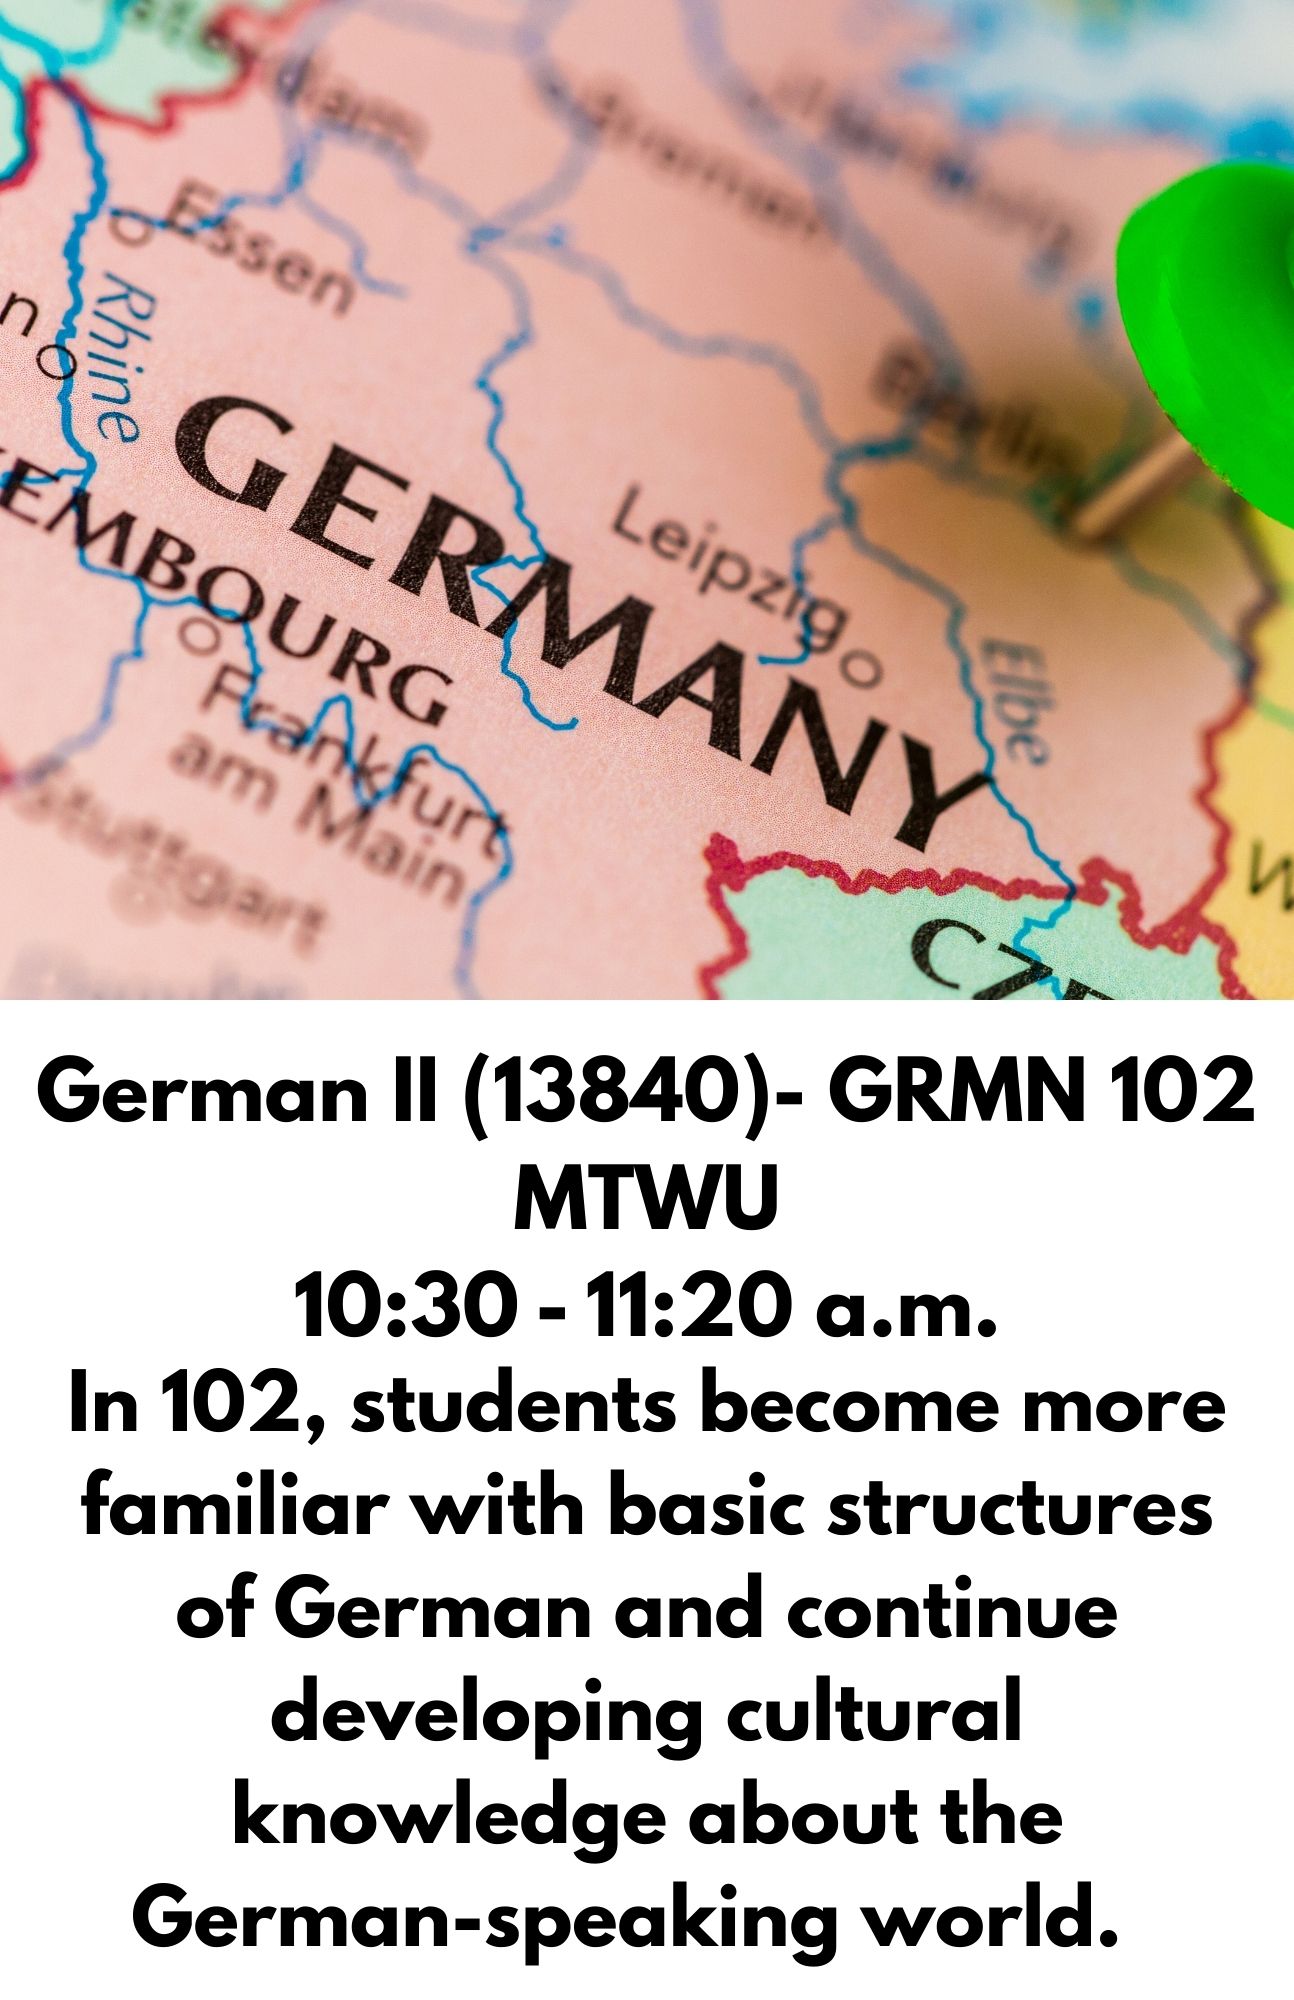 German II (13840)- GRMN 102 MTWU 10:30 - 11:20 a.m. In 102, students become more familiar with basic structures of German and continue developing cultural knowledge about the German-speaking world.